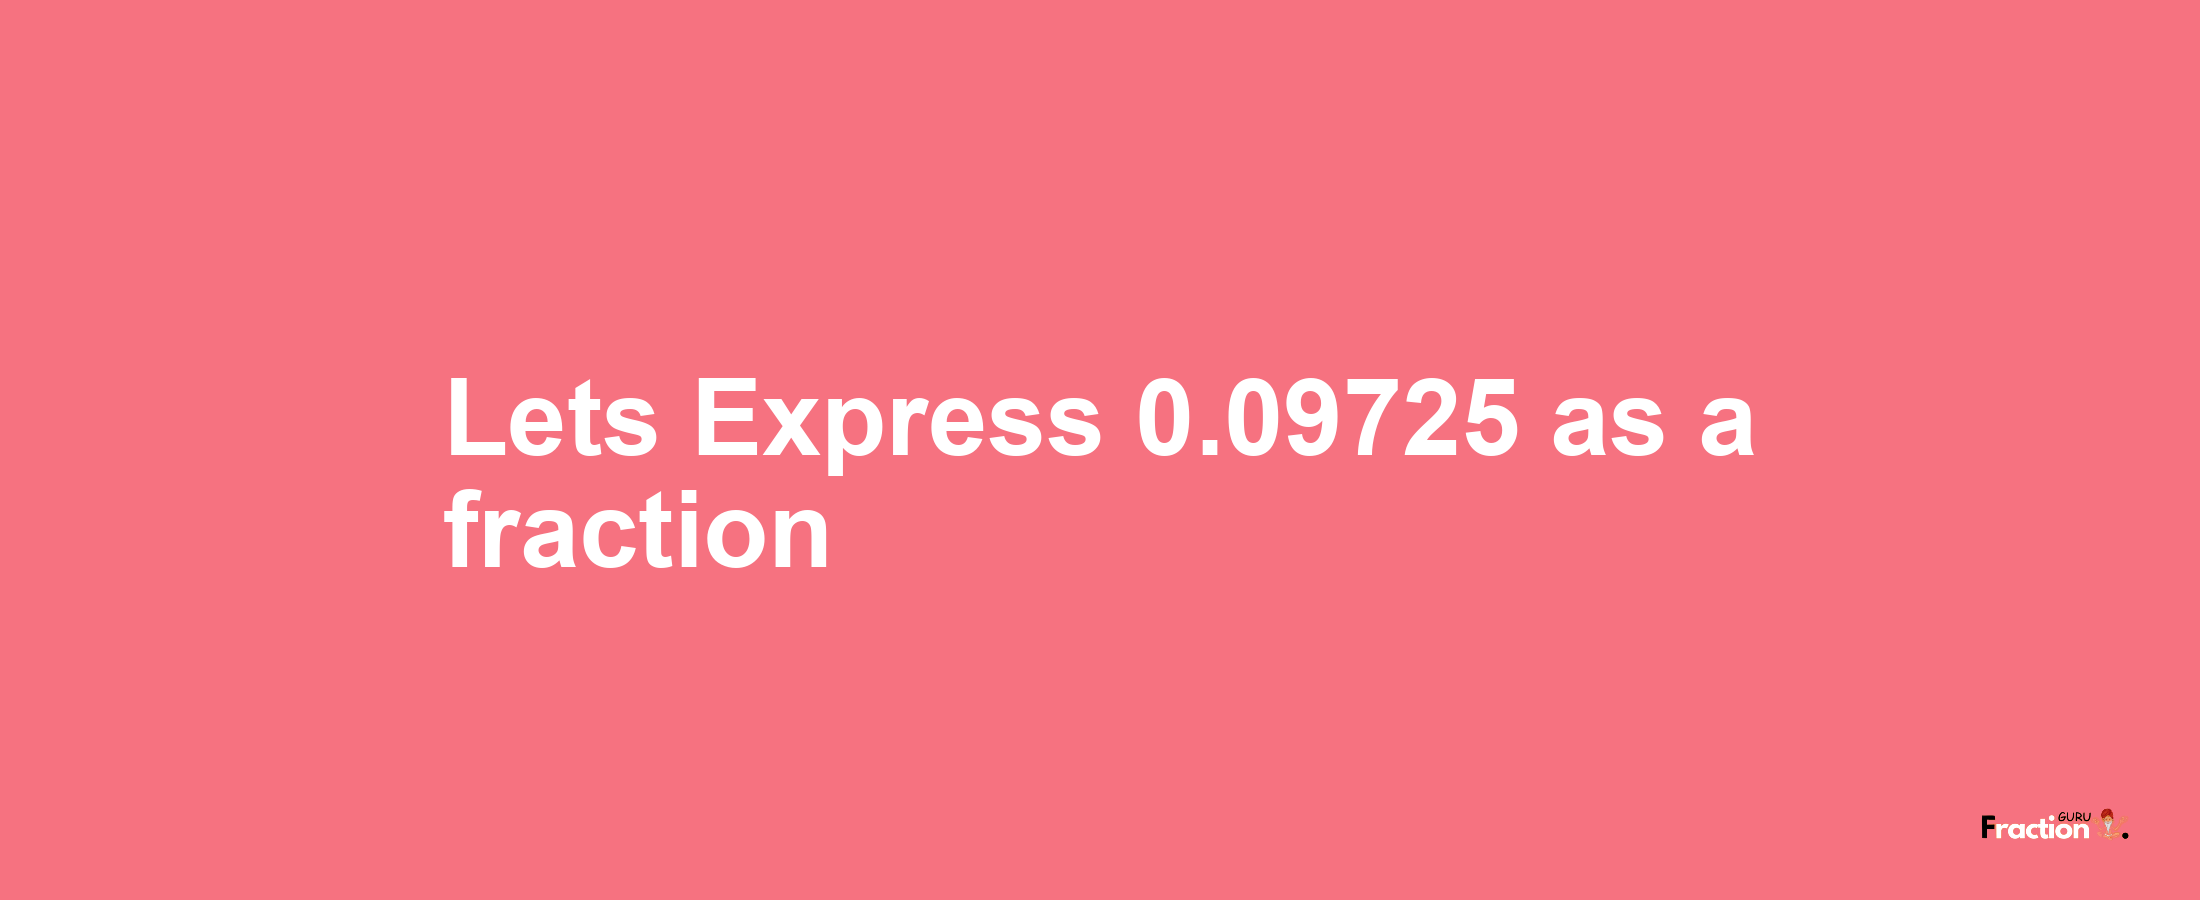 Lets Express 0.09725 as afraction